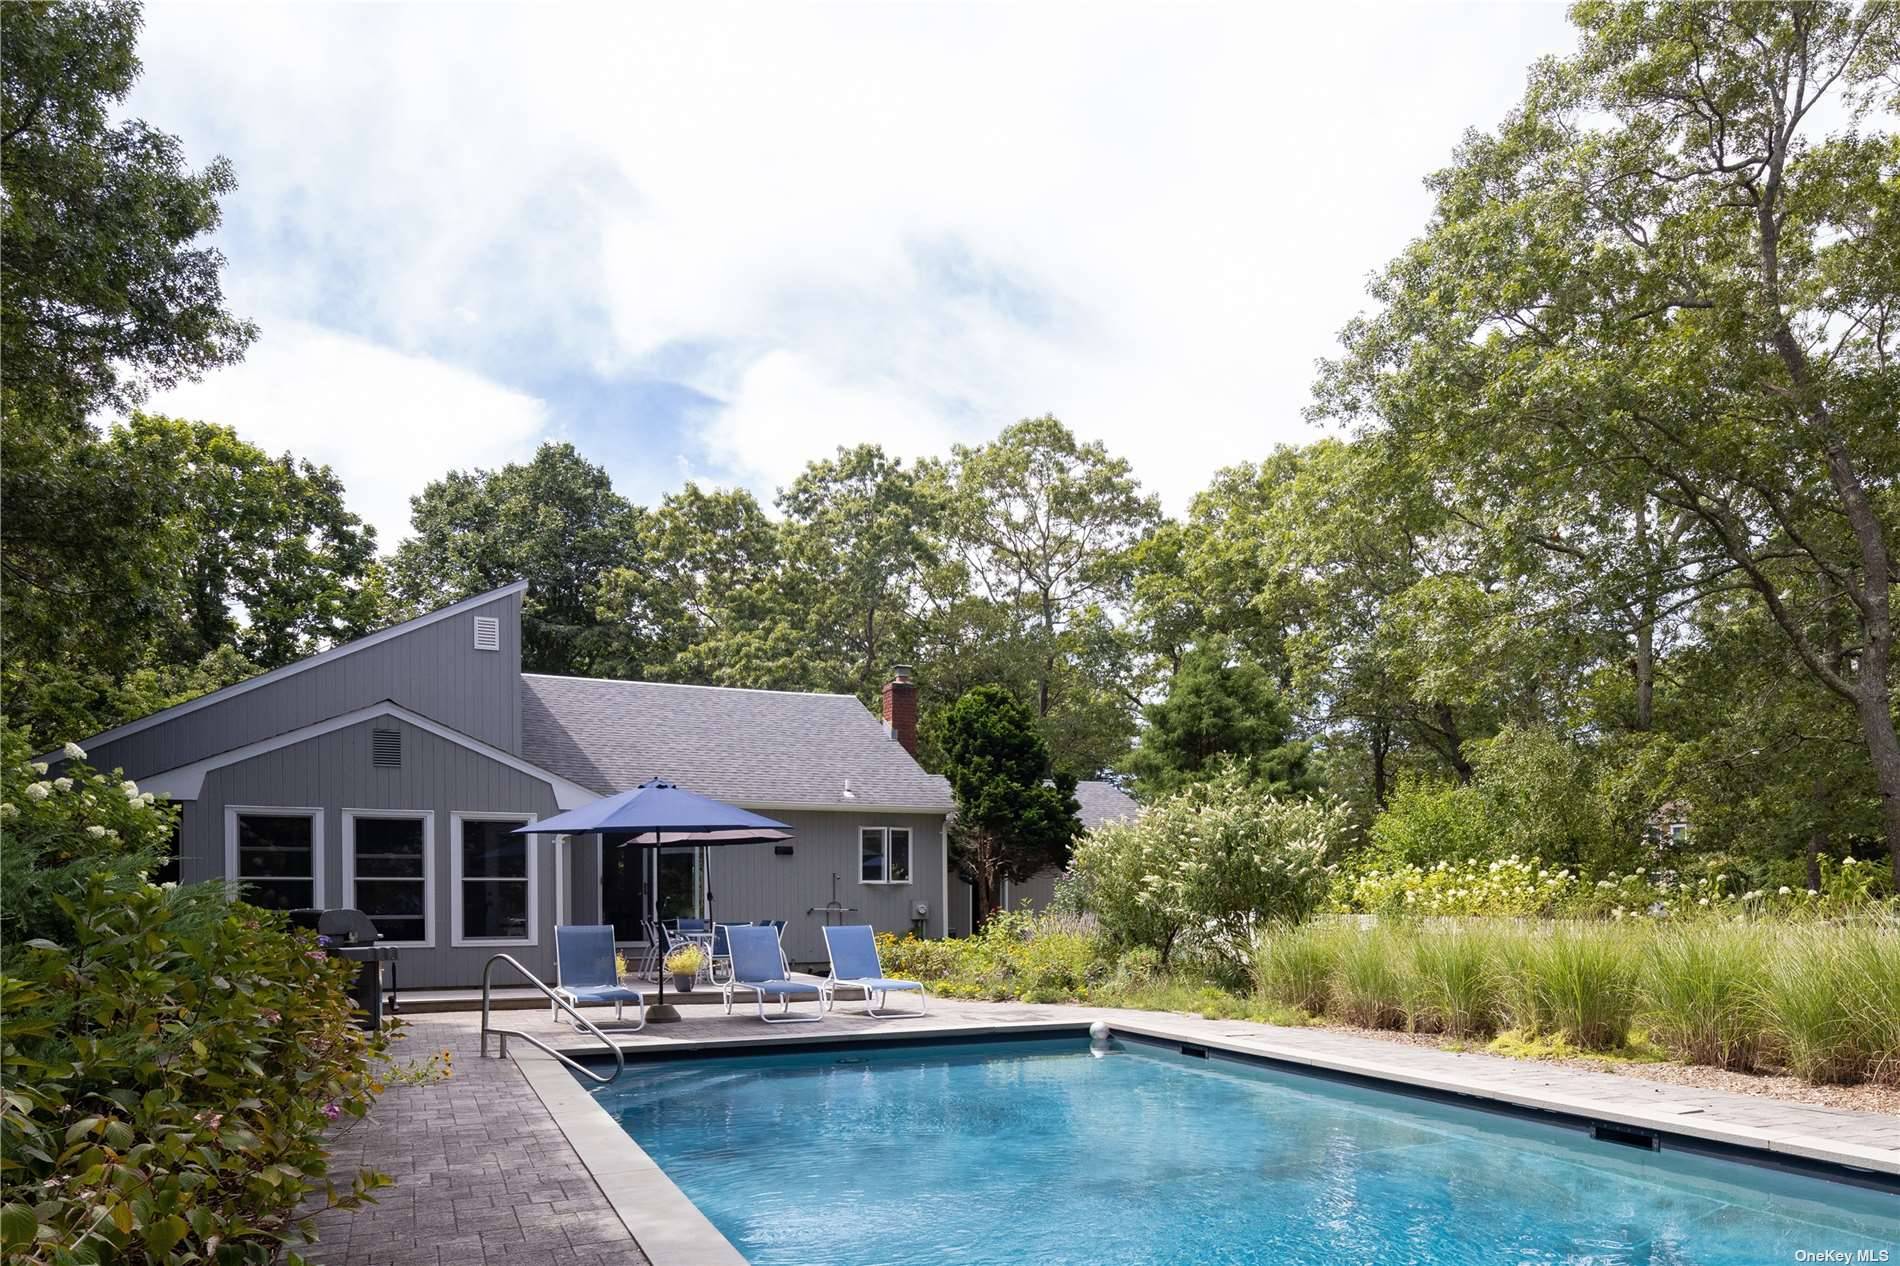 Light filled and move in ready, this 3 bedroom 2 bath contemporary home in the desirable Bay Estate section of East Quogue is now available to purchase.